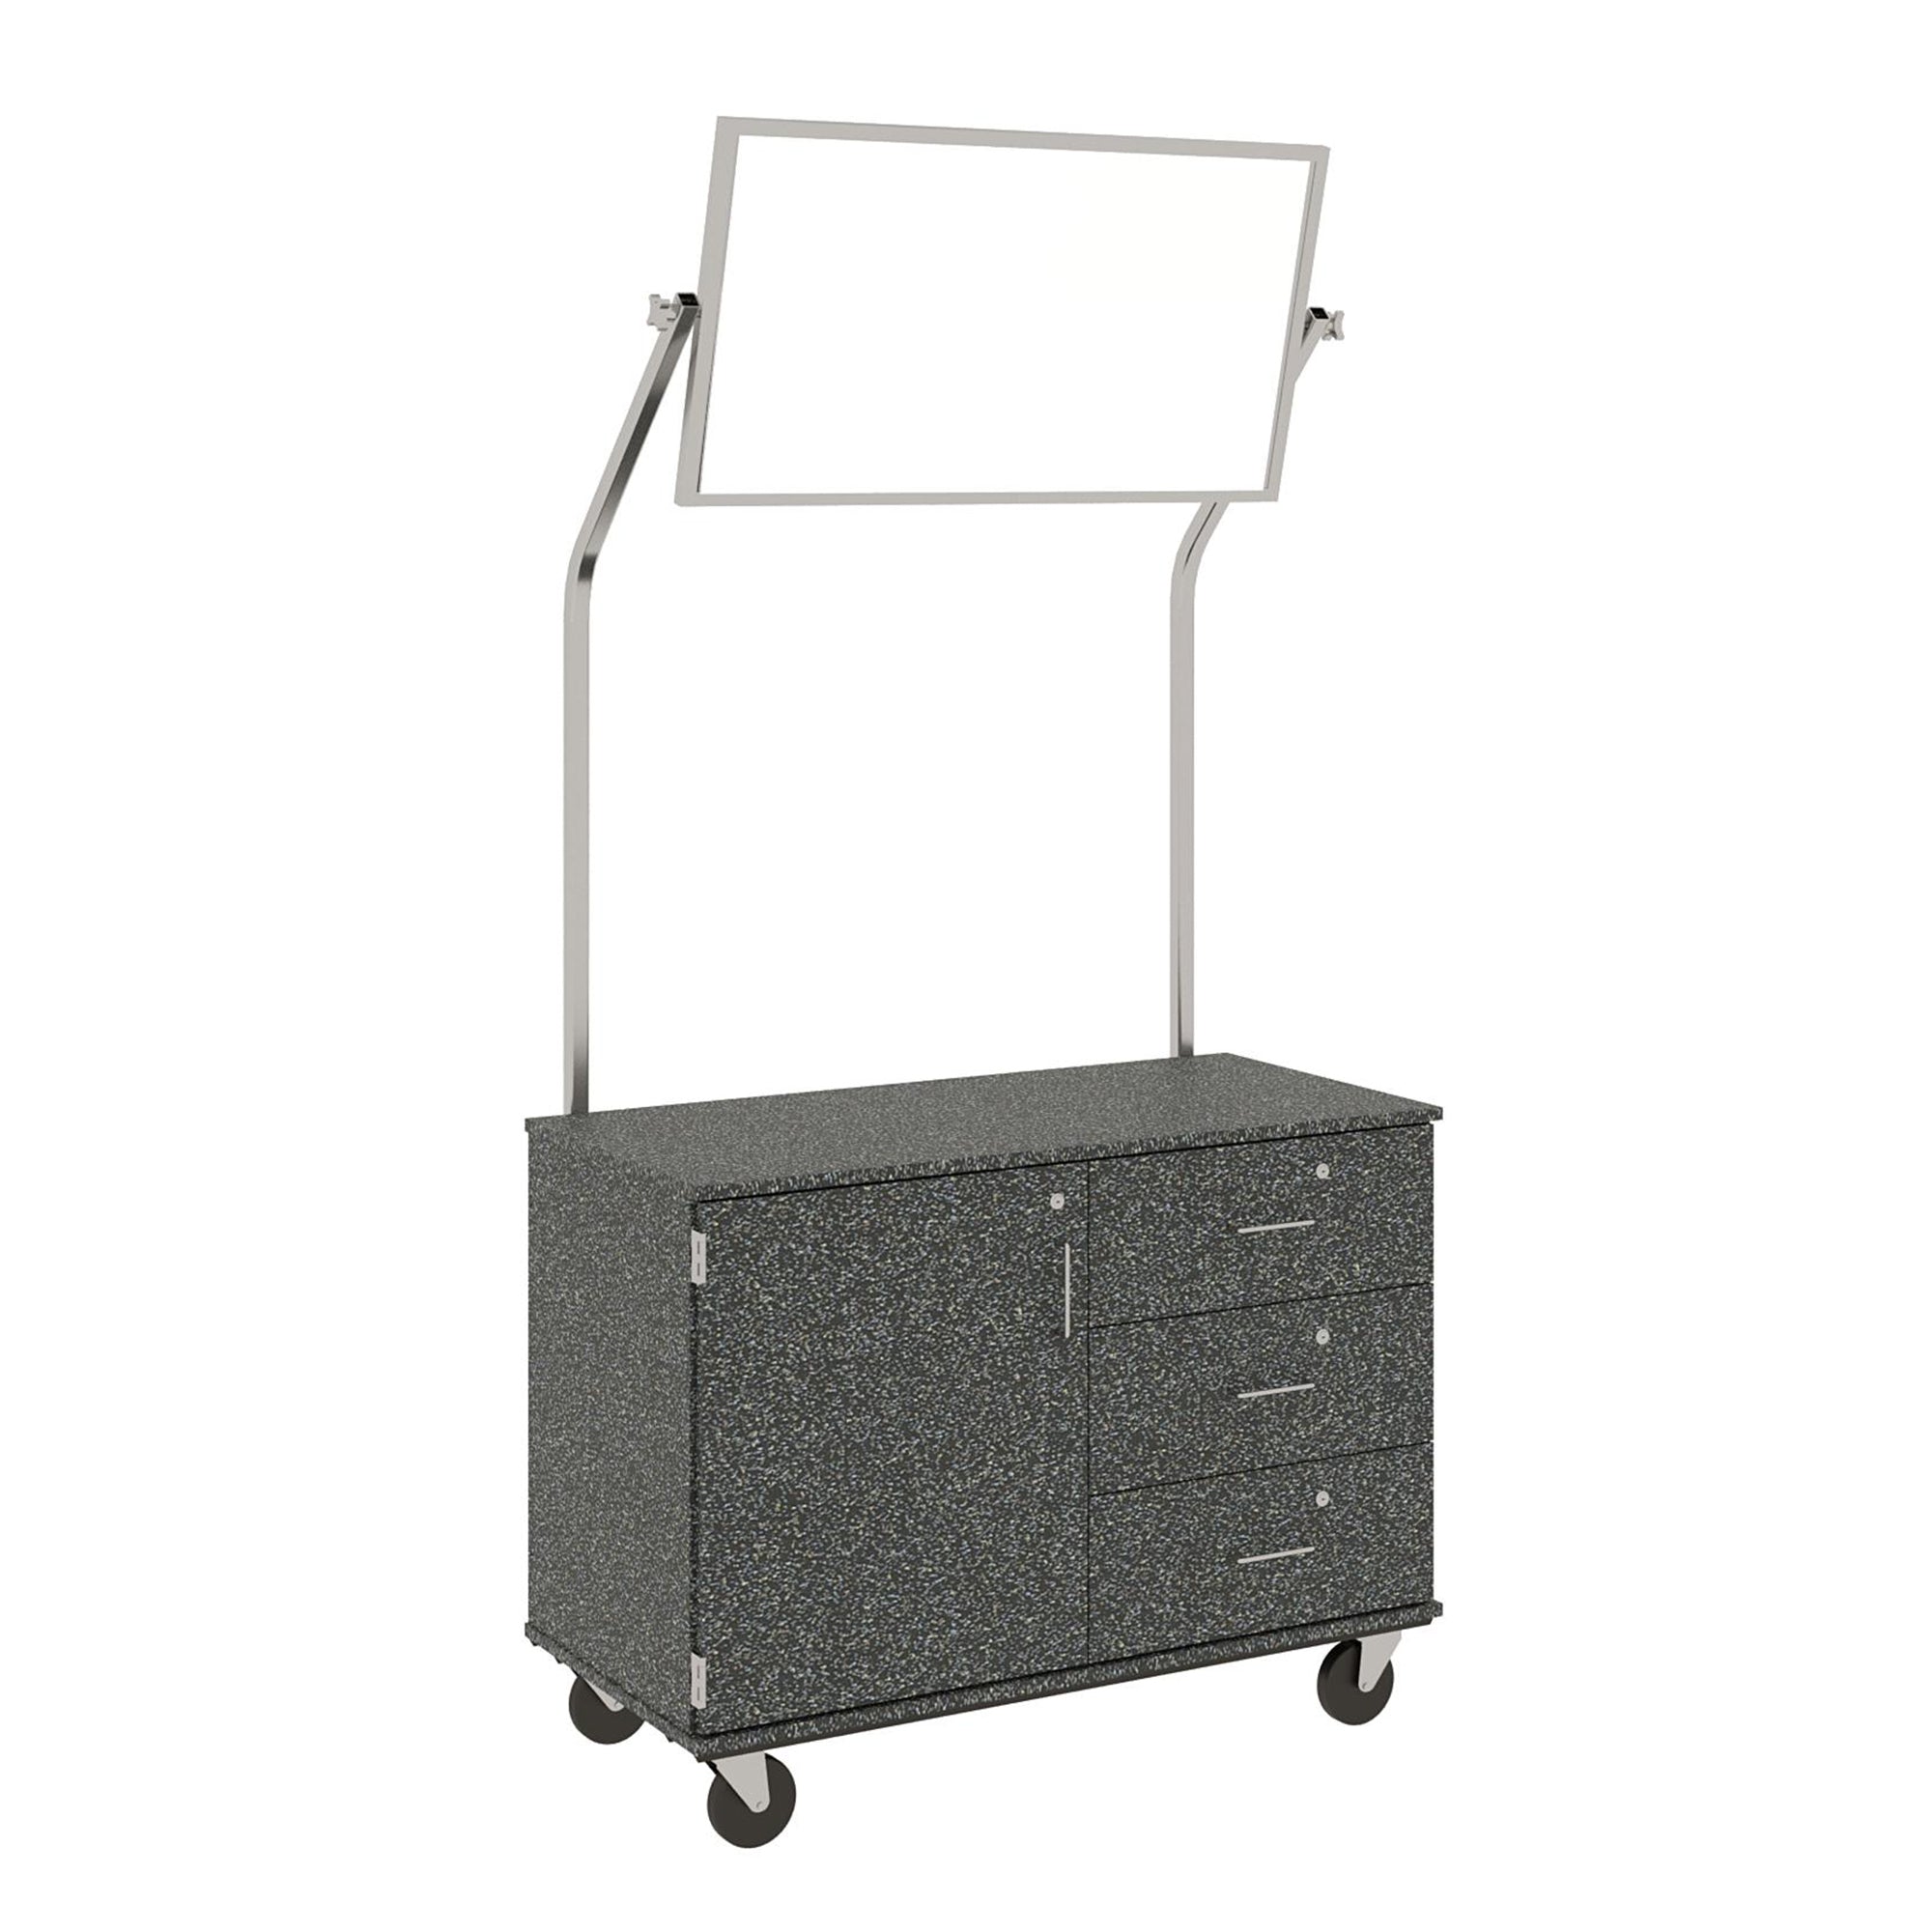 48" Wide Assembled Demonstration Station with Mirror, Storage Area & Three Drawers - 80733 F36